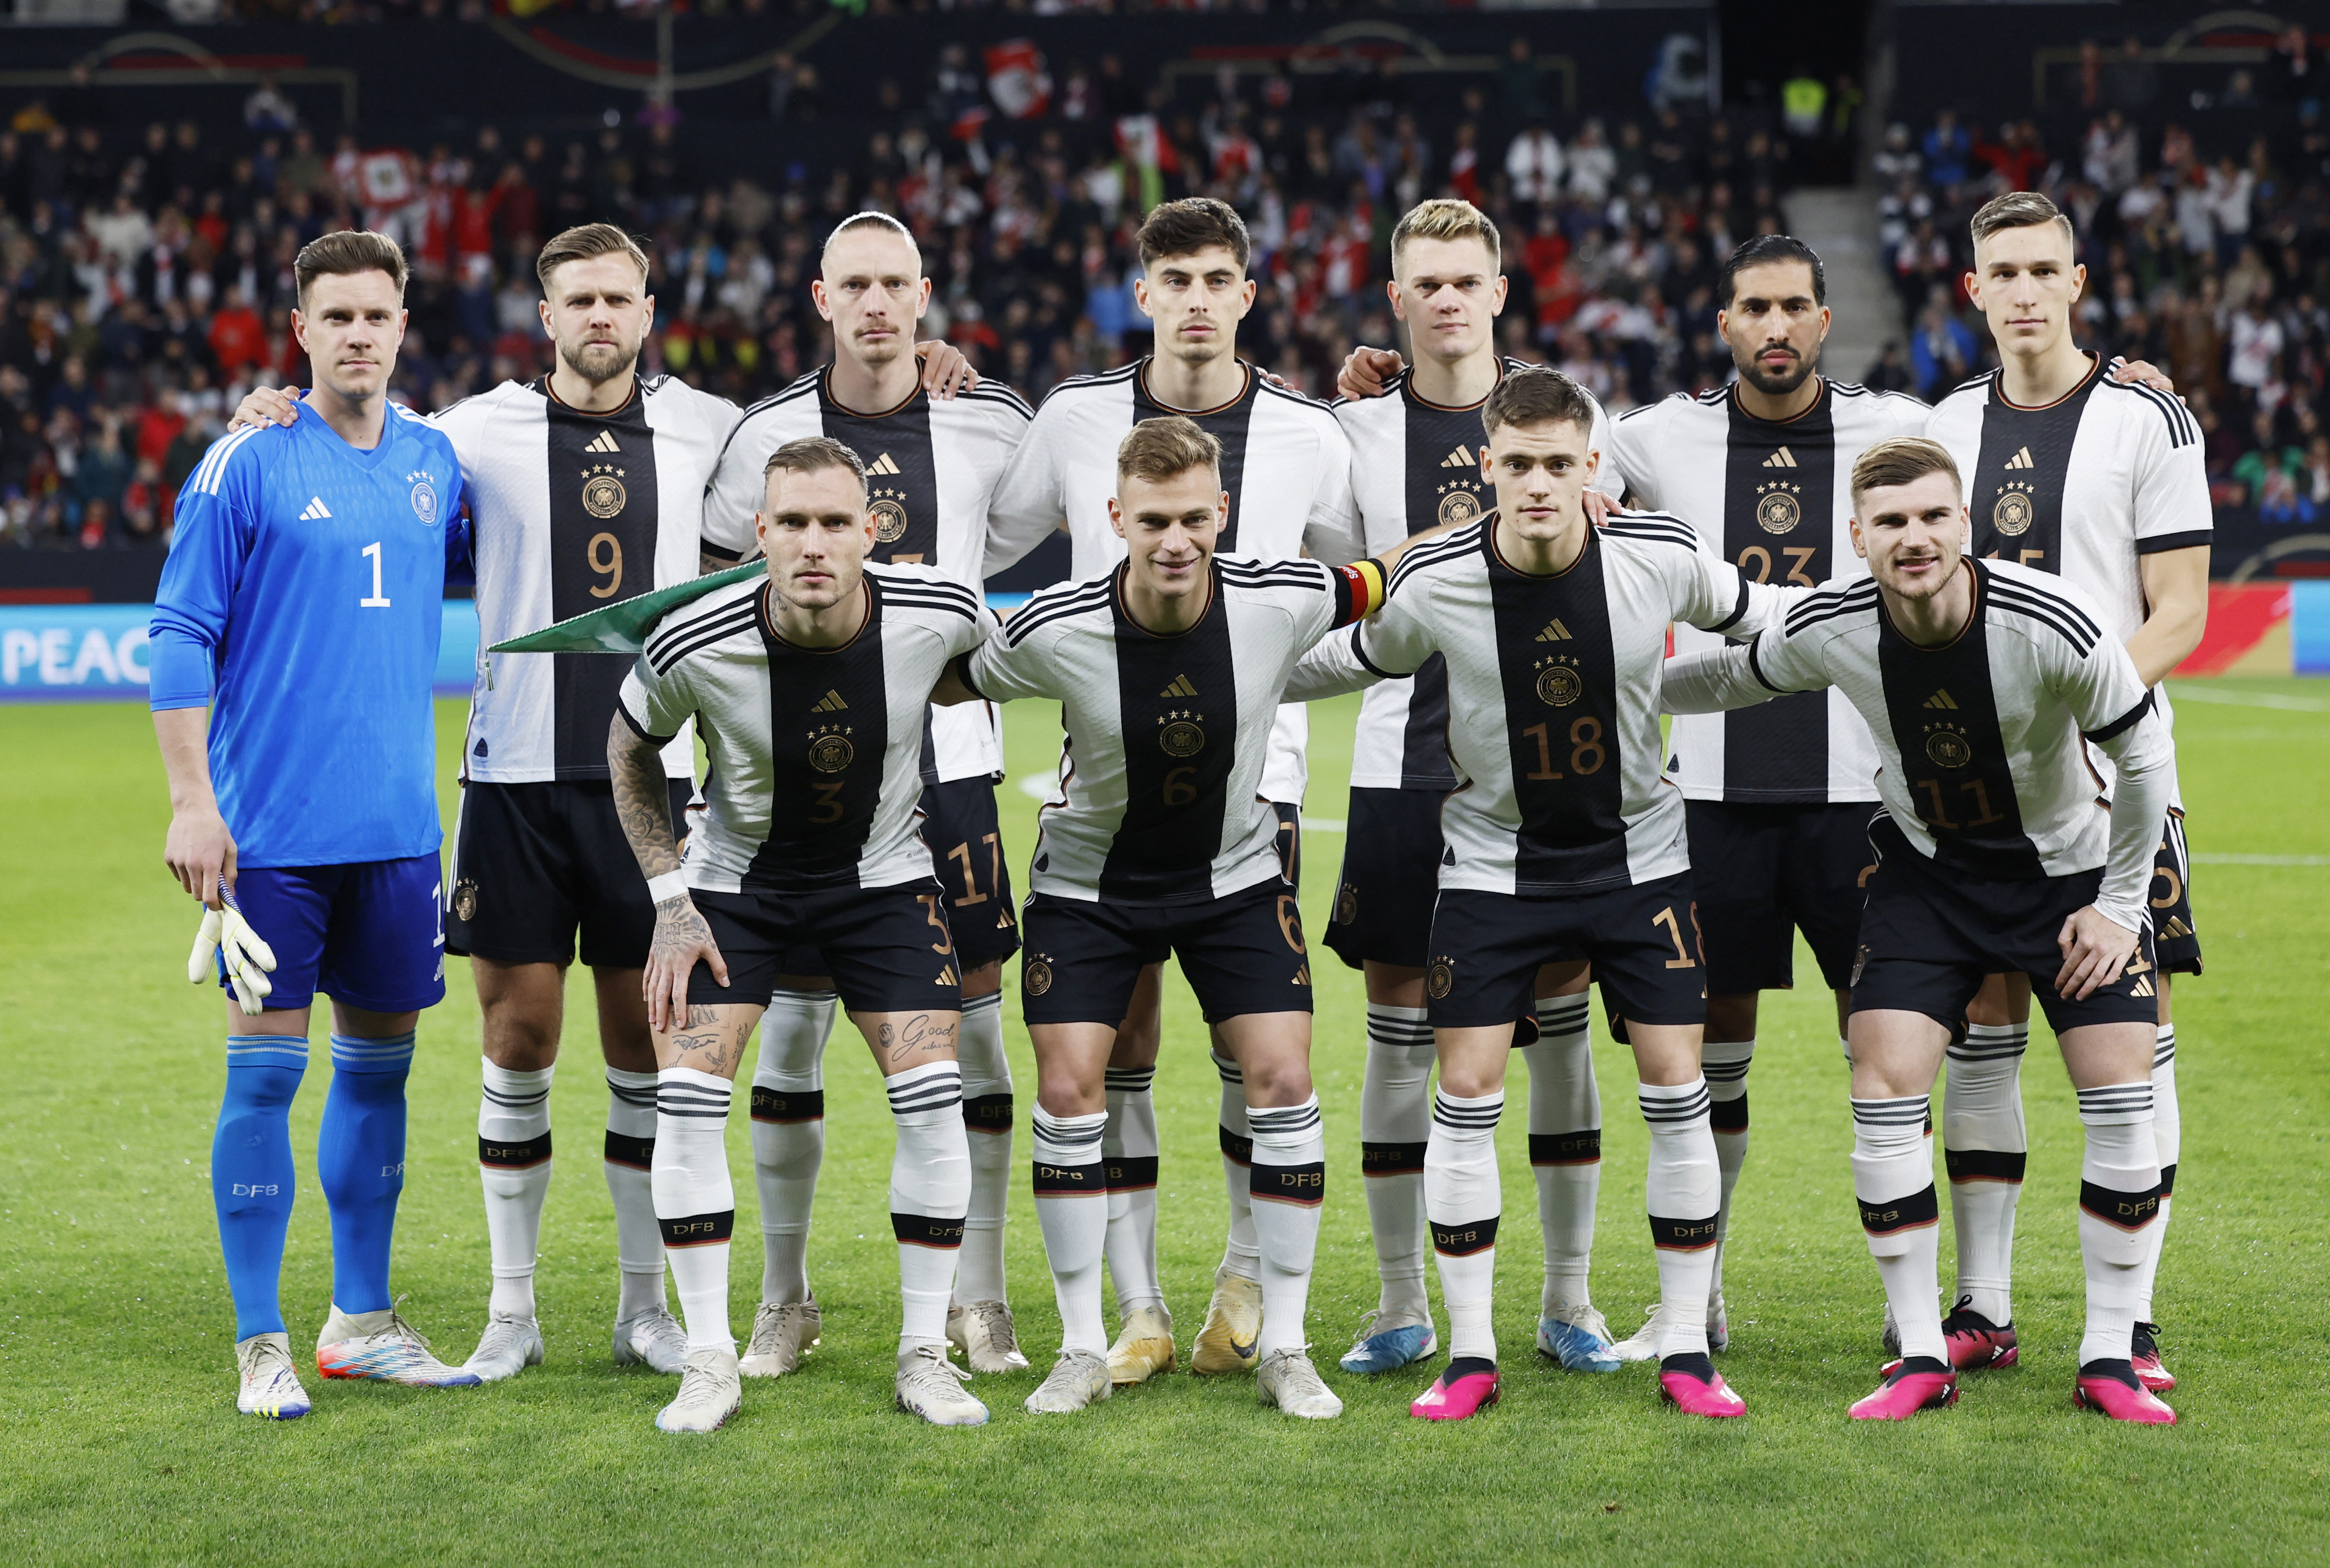 Soccer Football - International Friendly - Germany v Peru - MEWA Arena, Mainz, Germany - March 25, 2023 Germany players pose for a team group photo before the match REUTERS/Heiko Becker